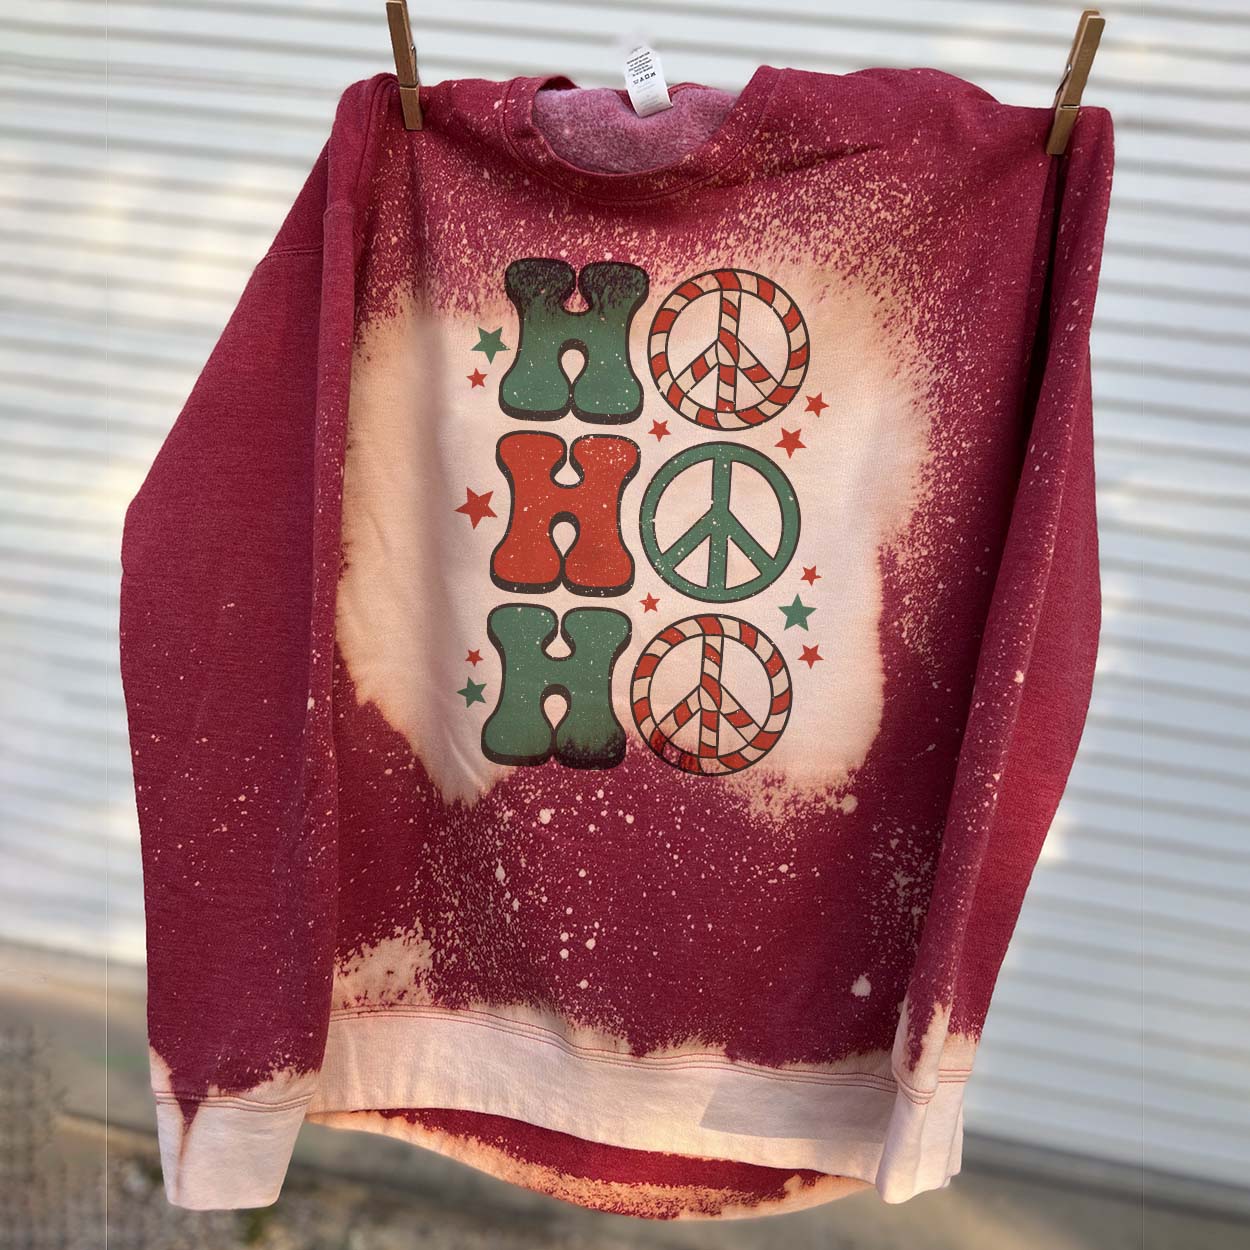 This bleached splatter sweatshirt in red includes a crew neckline, long sleeves, and a graphic that says "Ho Ho Ho" in a mix of cute font in red and green. The O's are peace signs and stars are all around the graphic. This is shown hanging from a clothesline with clothespins. 